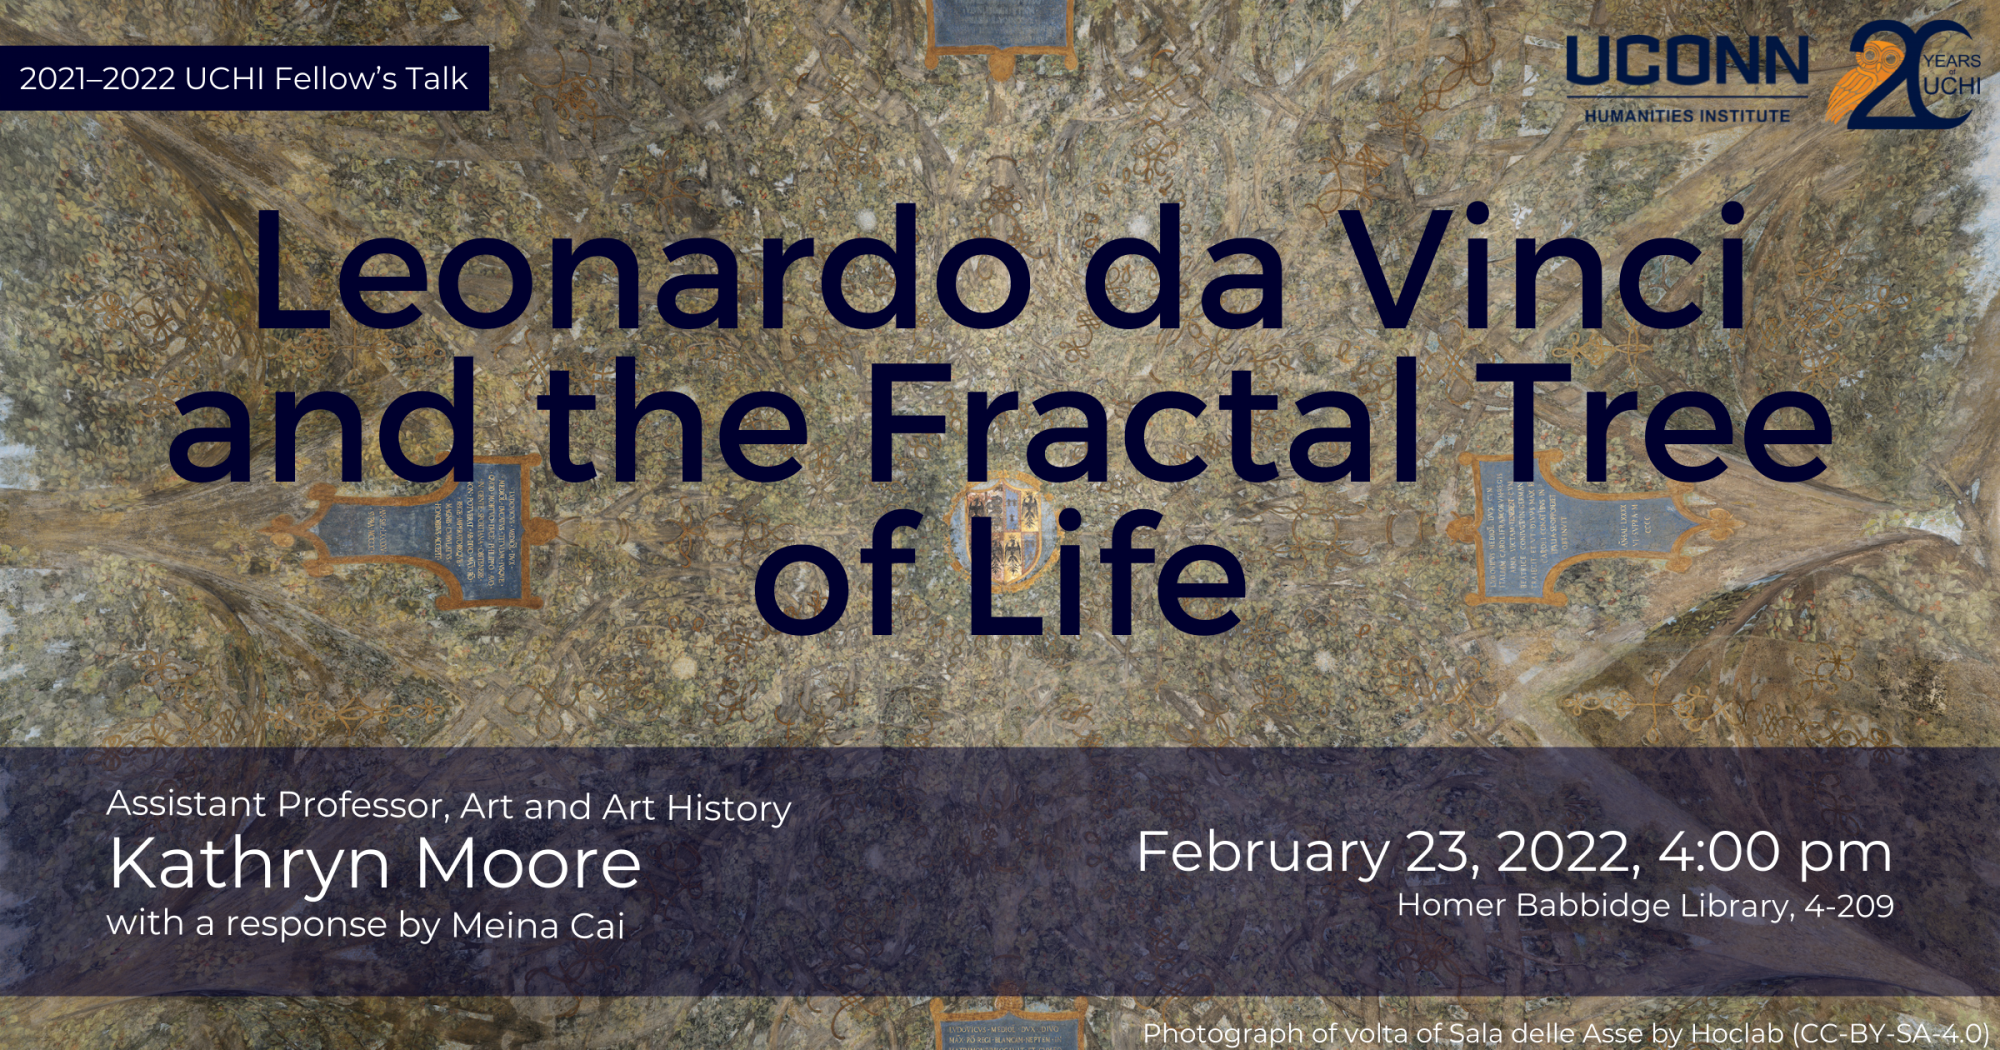 2021–22 UCHI fellow's talk. Leonardo da Vinci and the Fractal Tree of Life. Assistant Professor, Art and Art History, Kathryn Moore. With a response by Meina Cai. February 23, 2022, 4:00pm. Homer Babbidge library, 4-209.